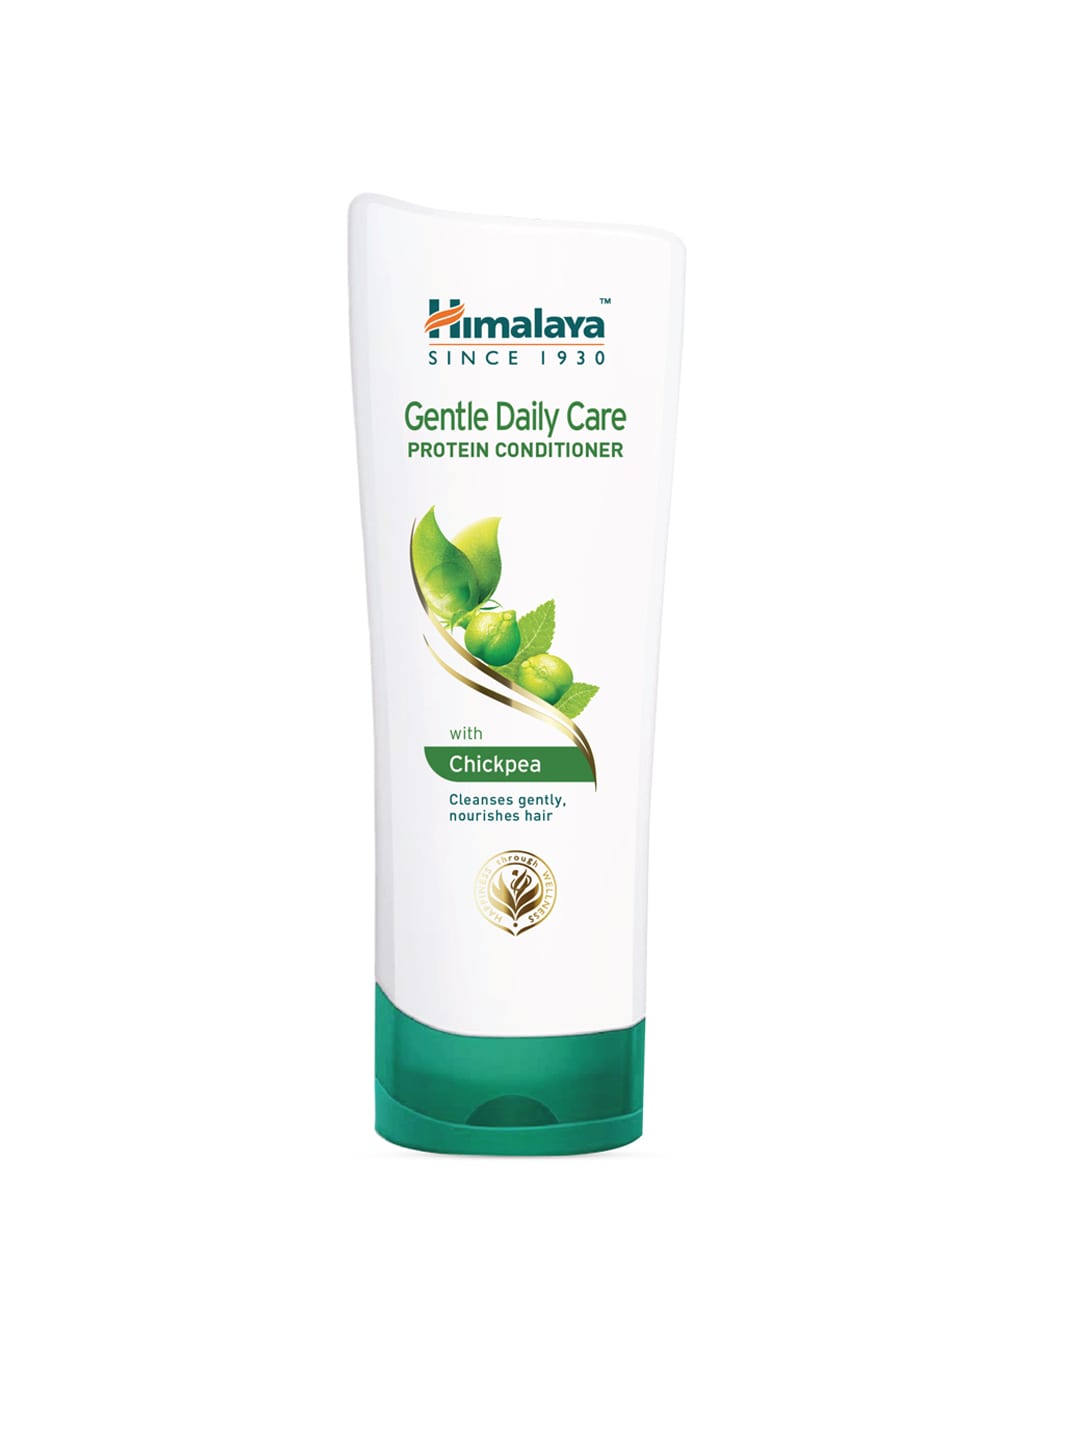 Himalaya Unisex Gentle Daily Care Protein Conditioner 200 ml Price in India